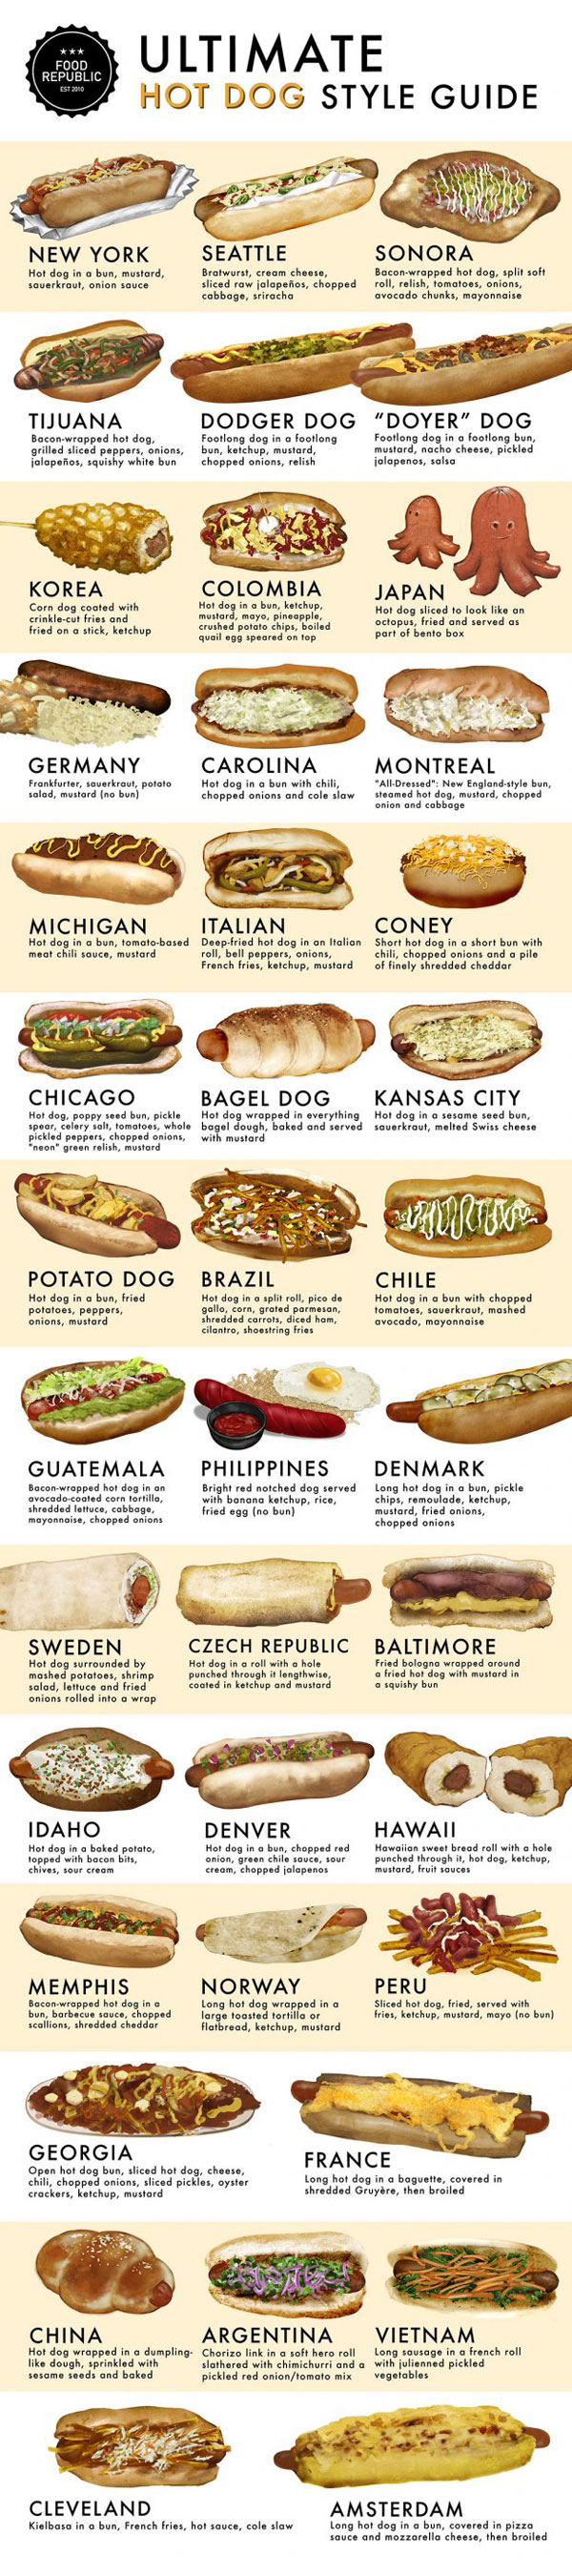 This is How the World Eats Hotdogs